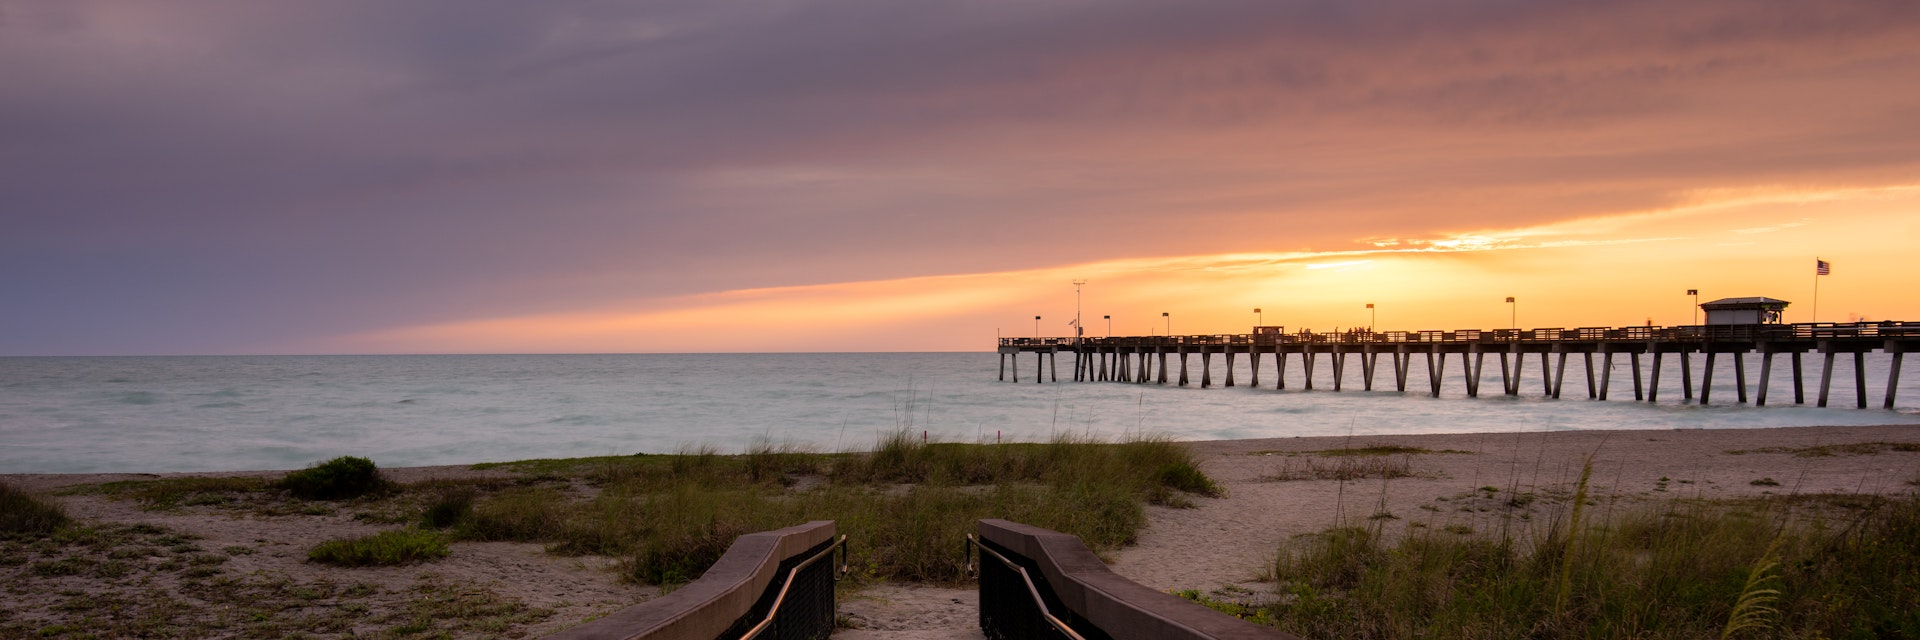 Nice sunset at Venice beach FL.; Shutterstock ID 1572707140; your: Claire Naylor; gl: 65050; netsuite: Online Editorial; full: Florida POI